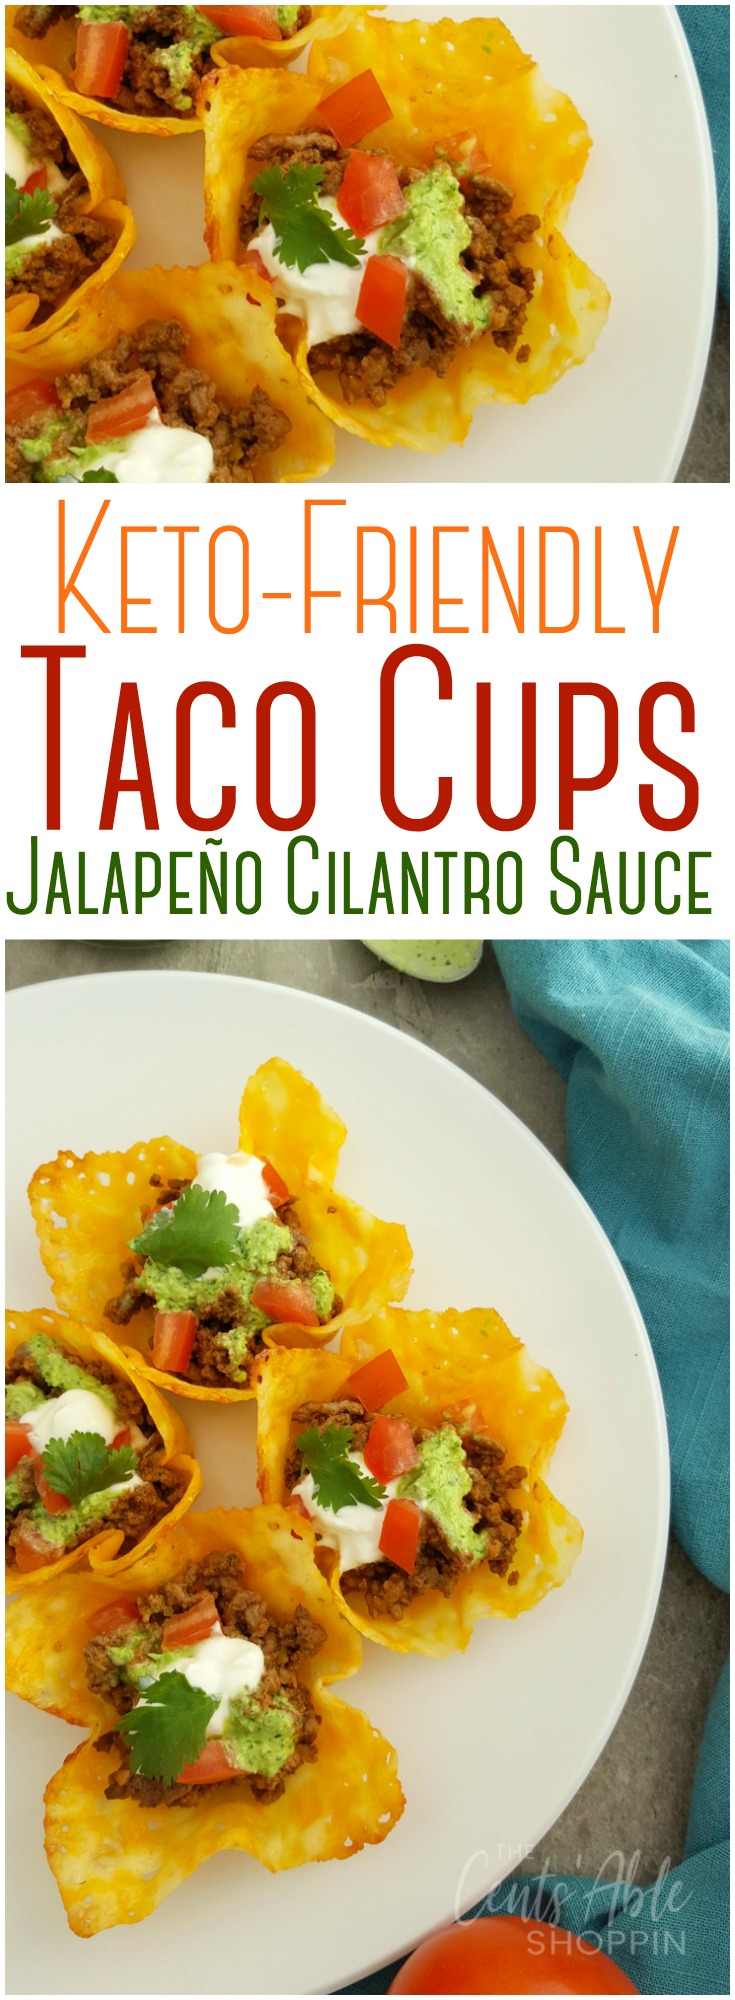 These delicious taco cups are simple to throw together and Keto friendly! #taco #Ketorecipes #keto #tacocups #healthymeals 